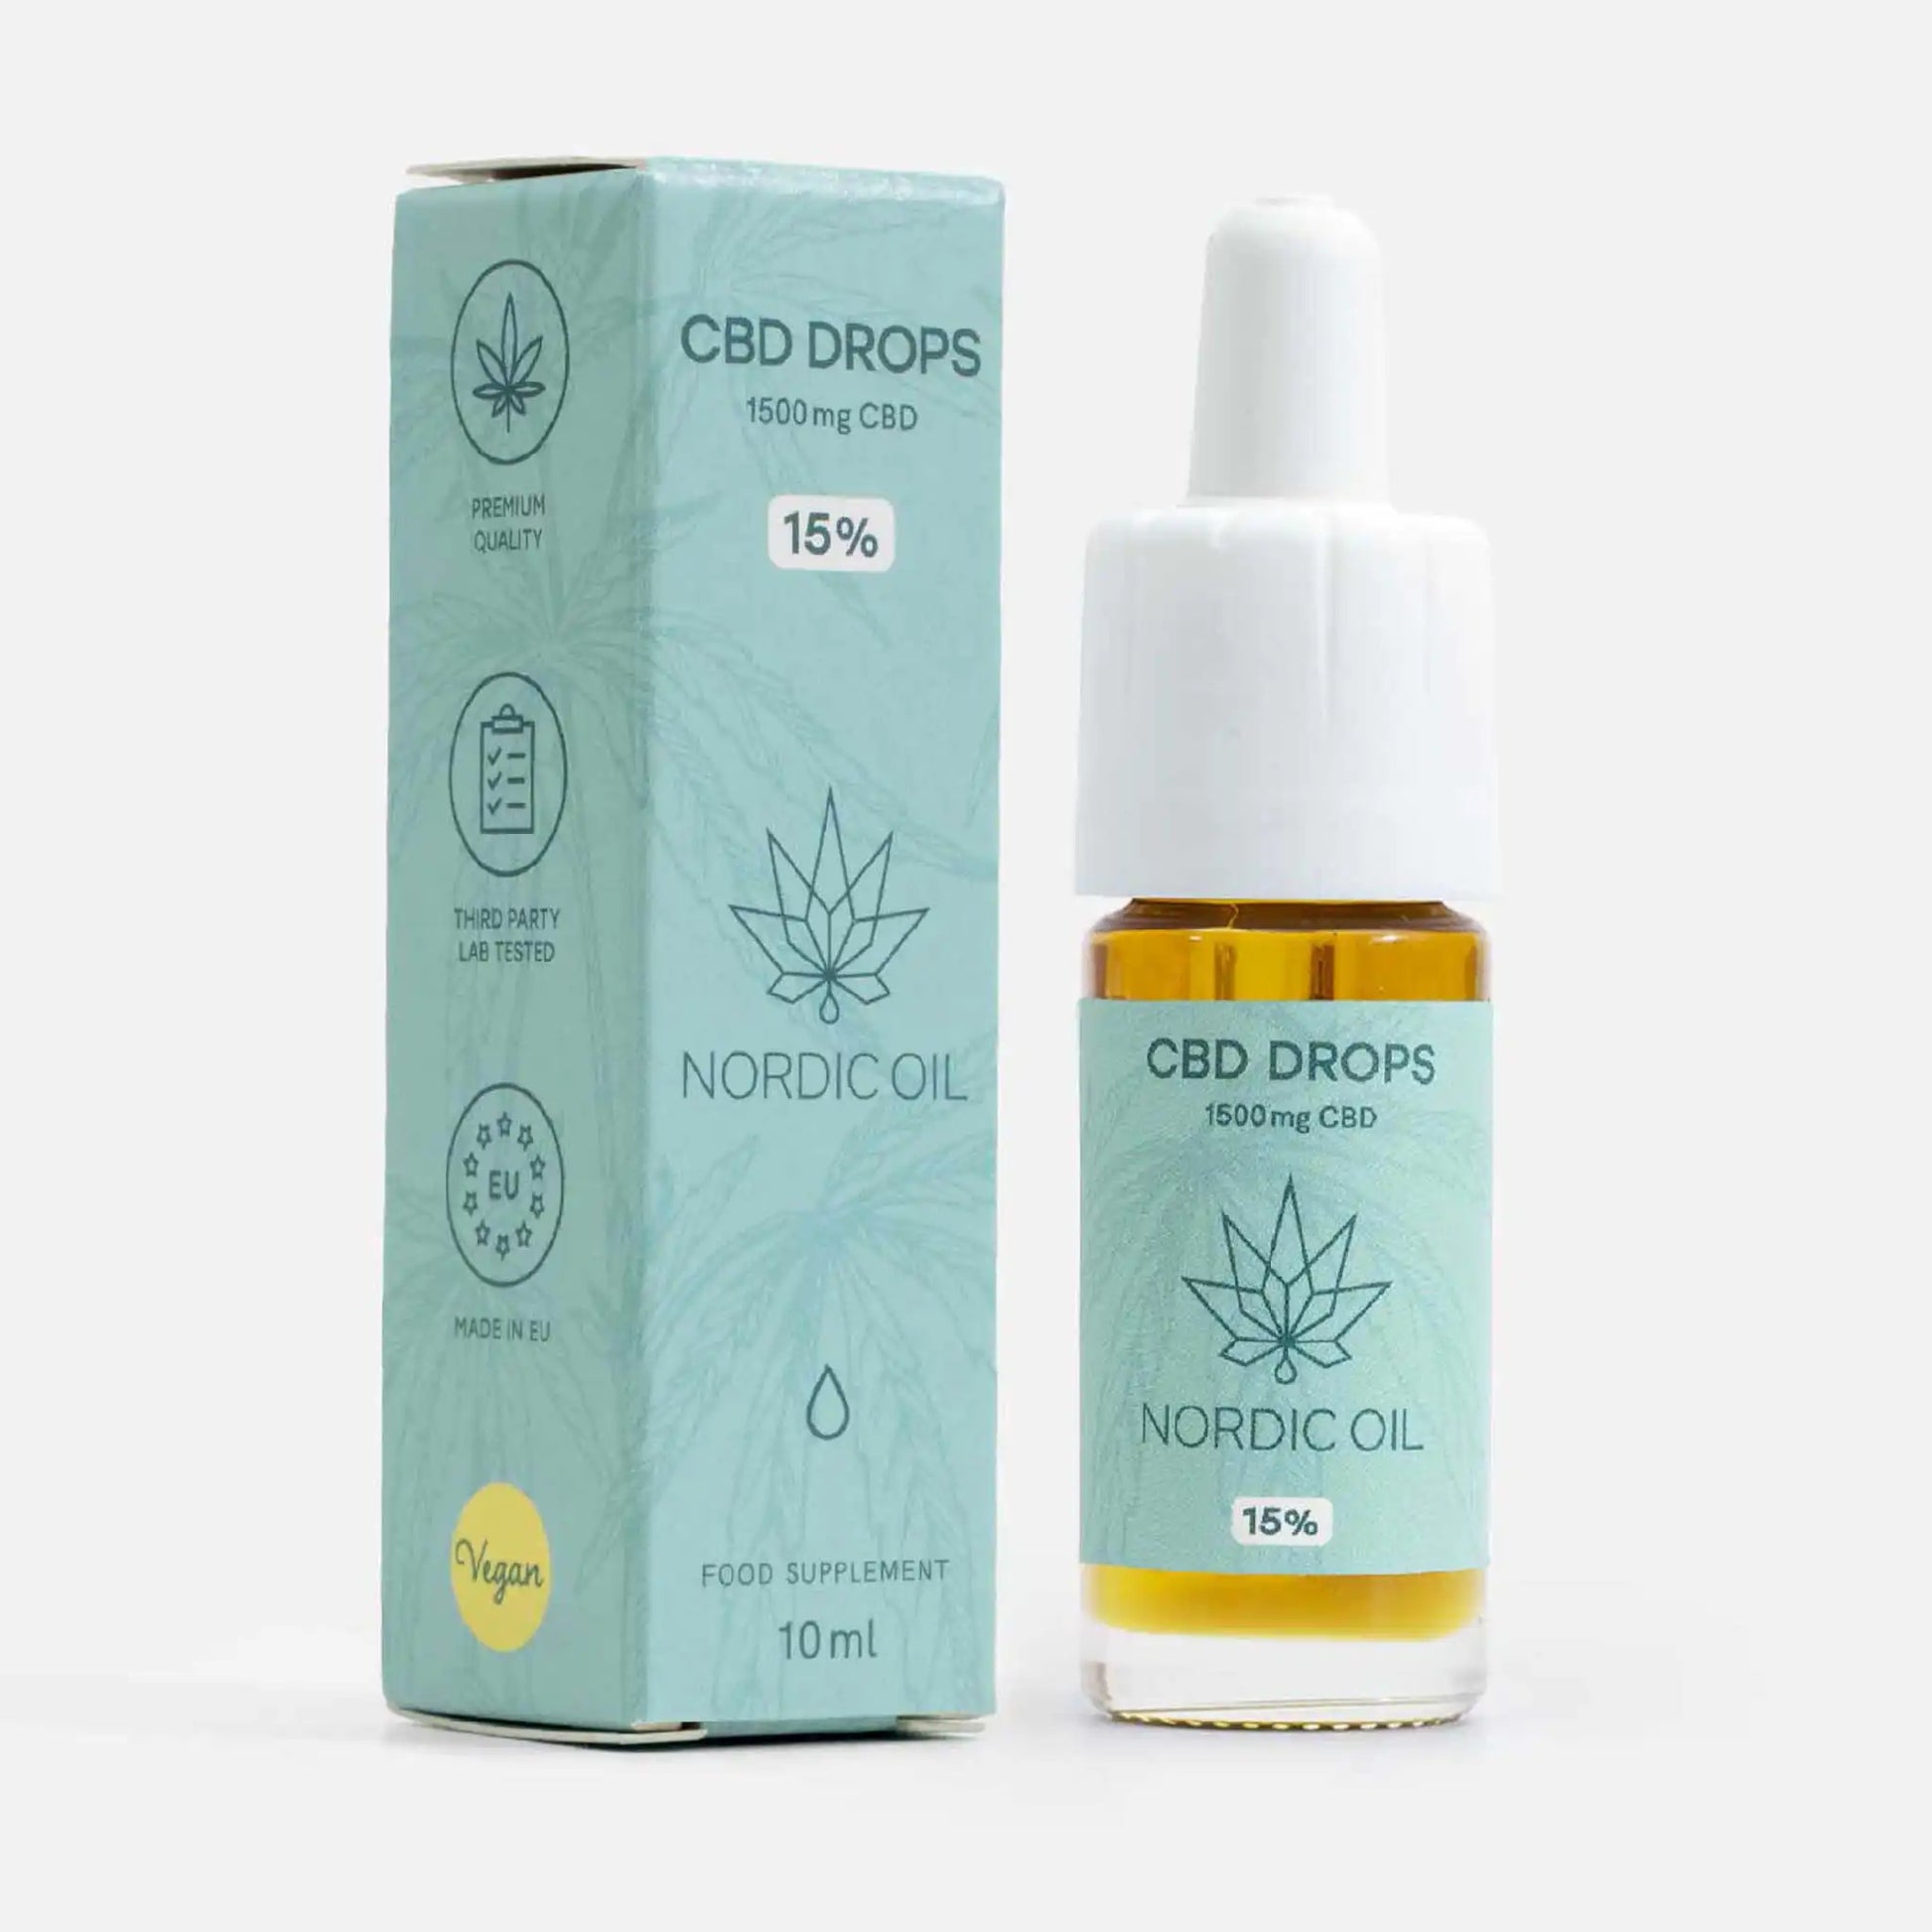 cbd oil - product and packaging